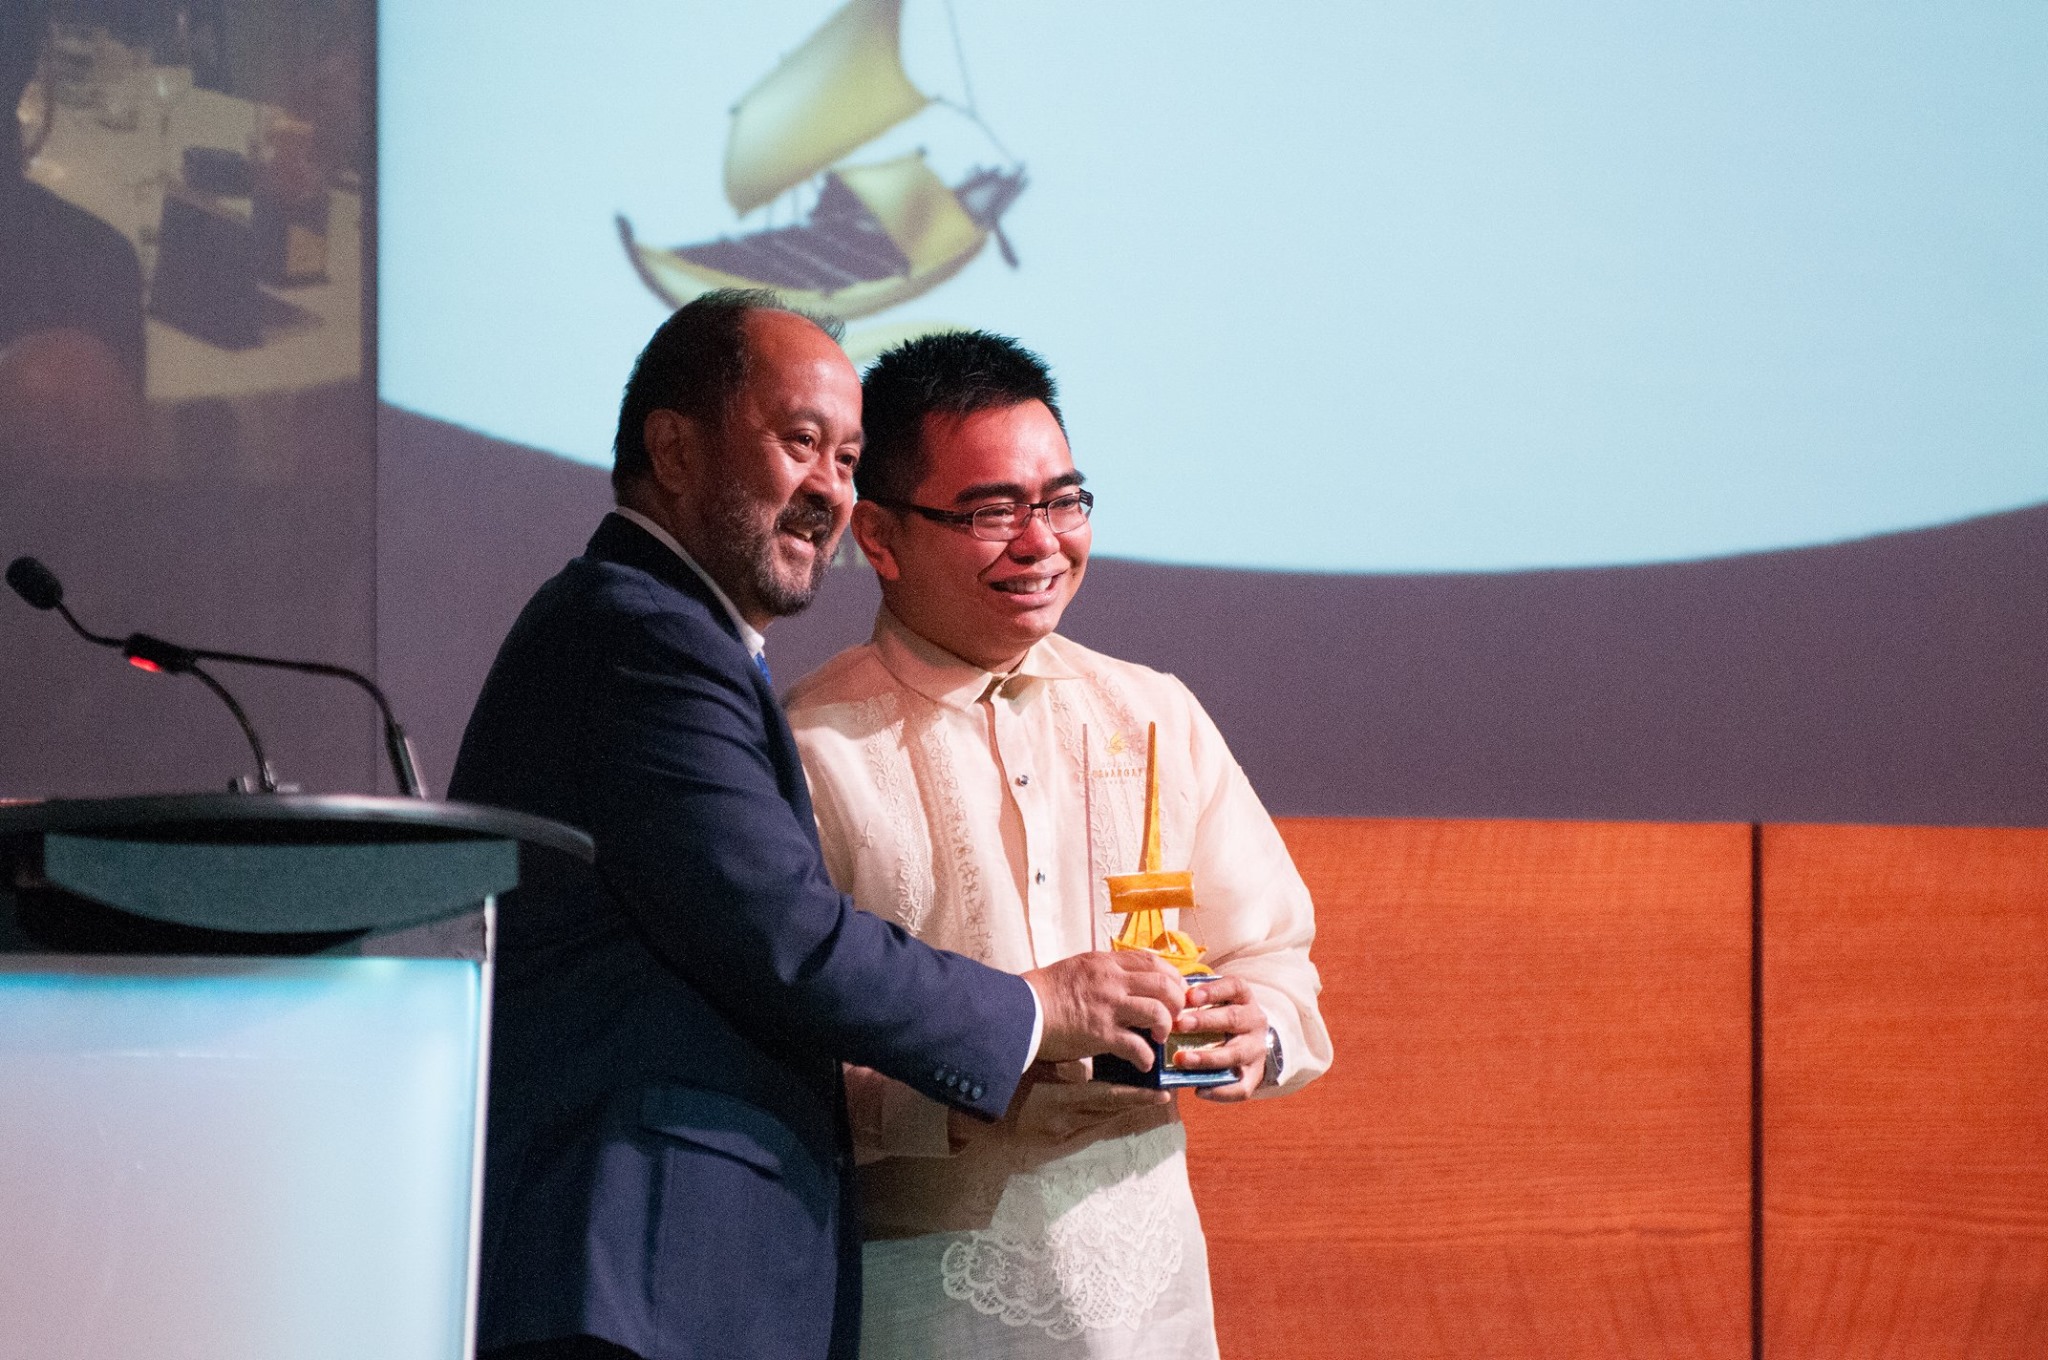 Patrick Alcedo receives “Pinoy of the Year” Award